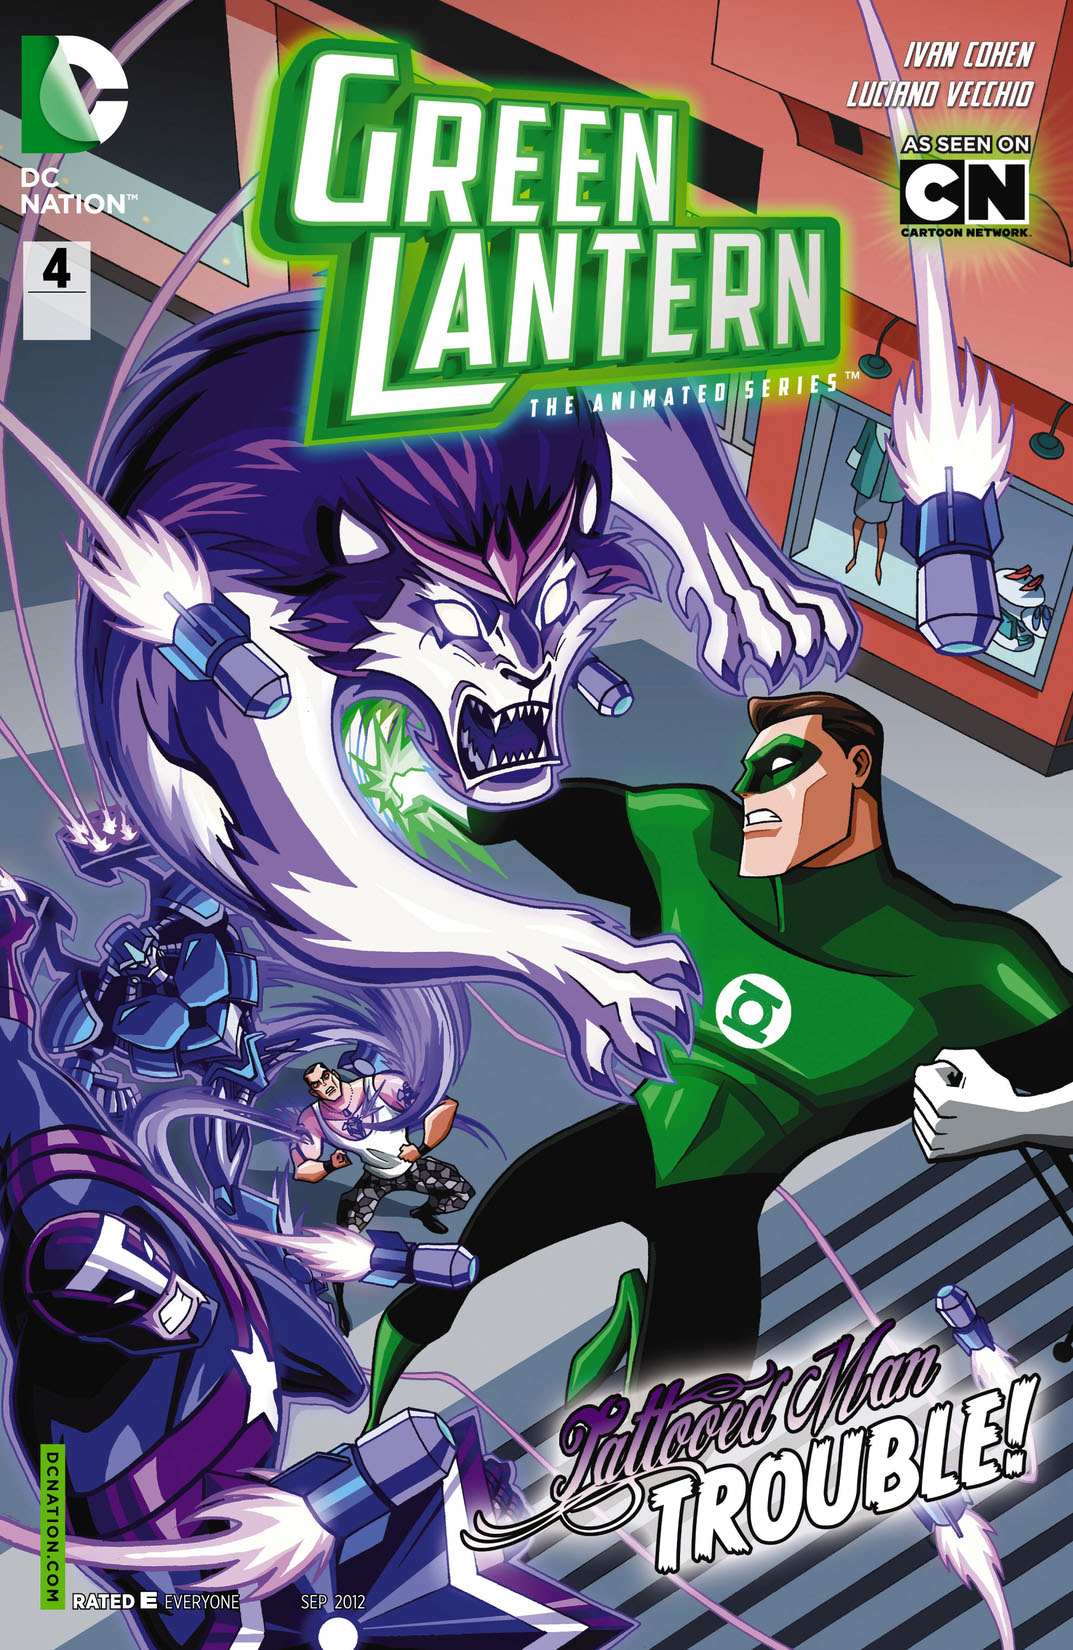 Green Lantern: The Animated Series #4 preview images